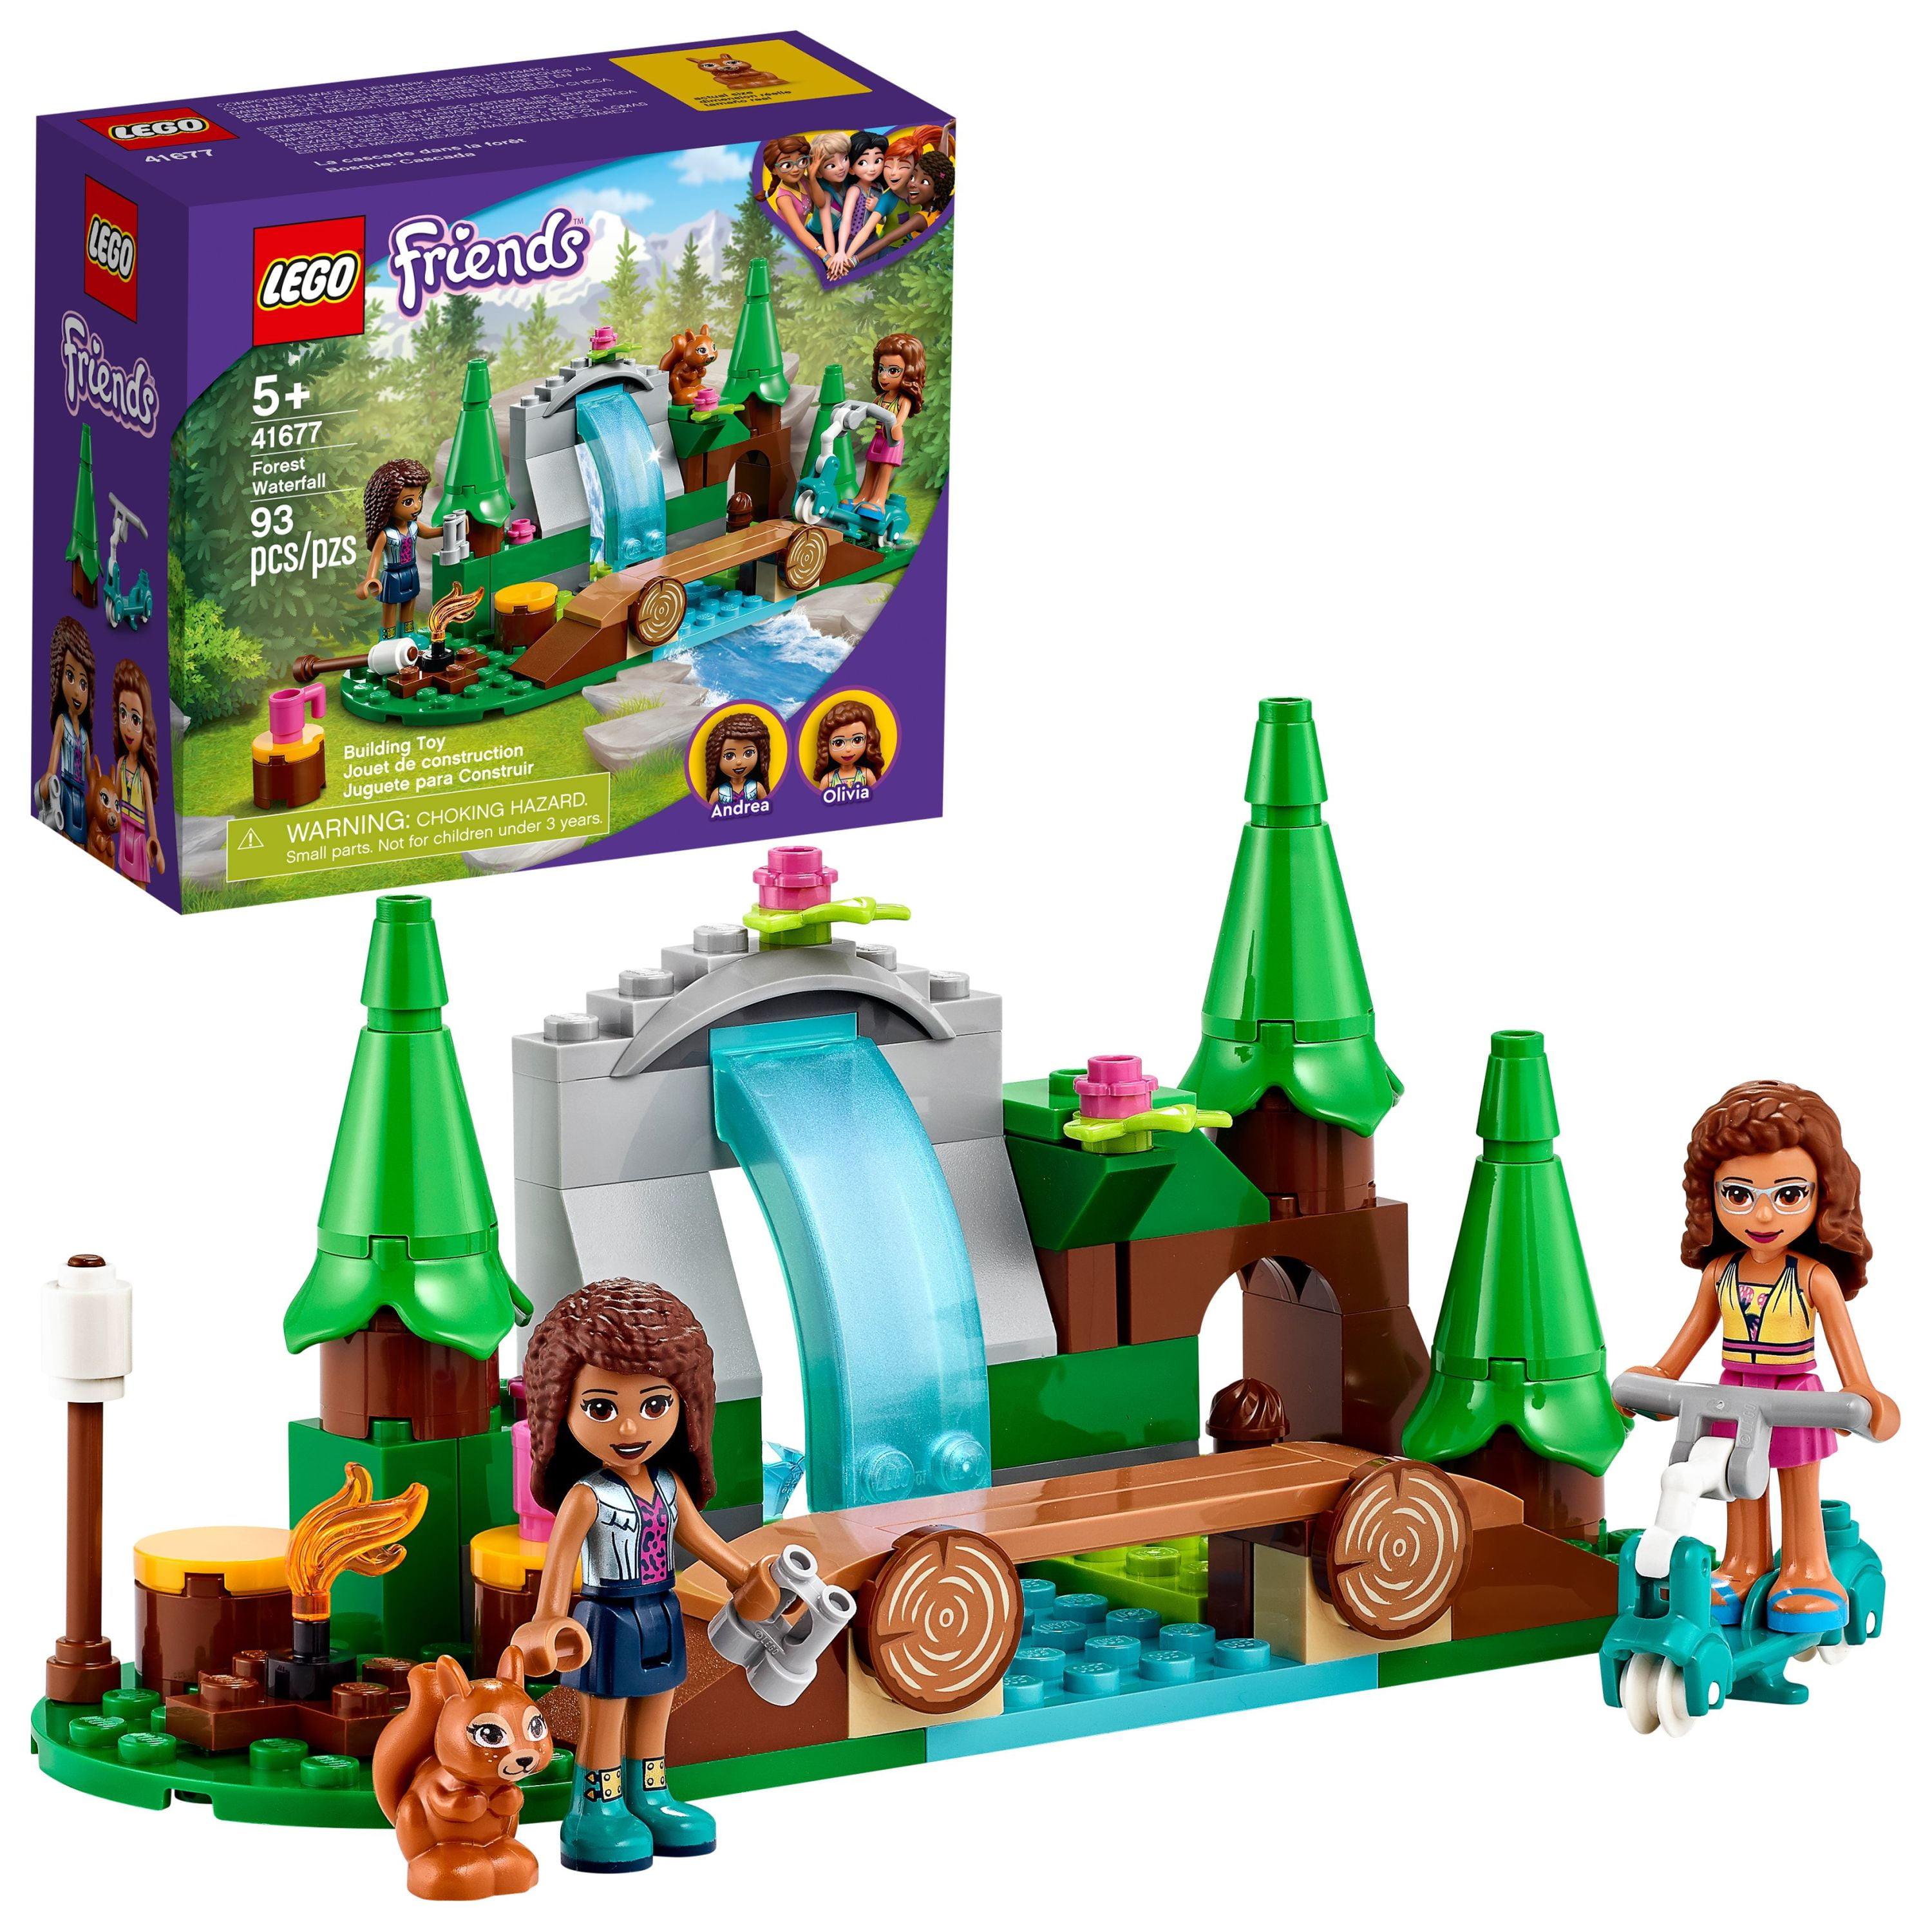 Kritisere Salme Indbildsk LEGO Friends Forest Waterfall Camping Adventure Set 41677, Building Toys  with Andrea and Olivia Mini-Dolls, Toys for 5 Plus Year Old Kids, Girls &  Boys, Gift Idea - Walmart.com